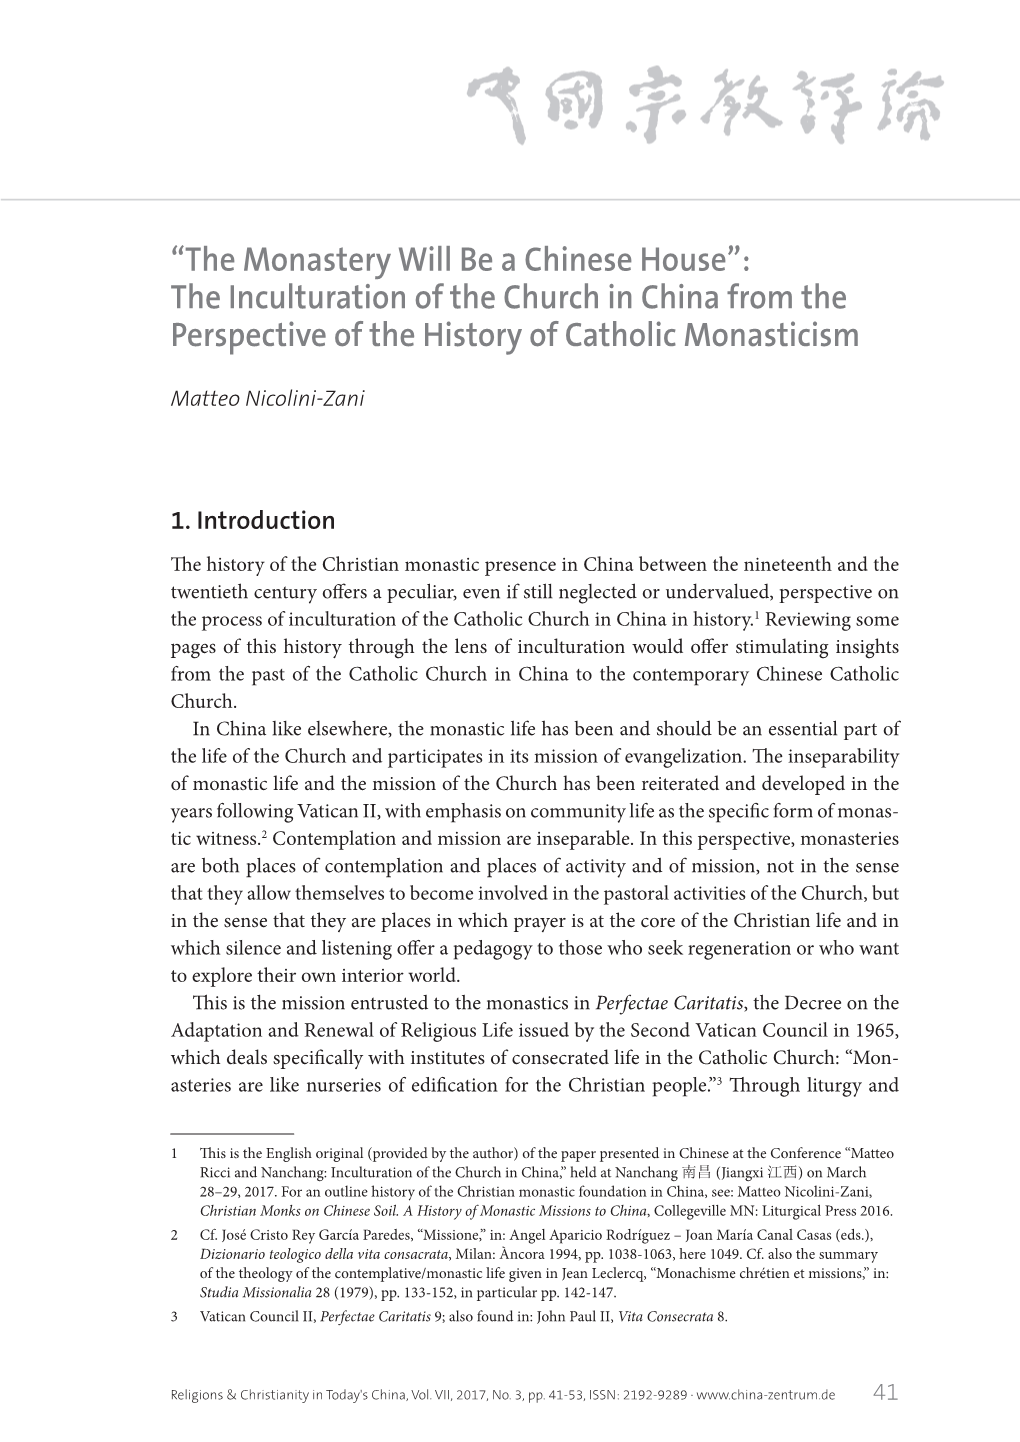 “The Monastery Will Be a Chinese House”: the Inculturation of the Church in China from the Perspective of the History of Catholic Monasticism